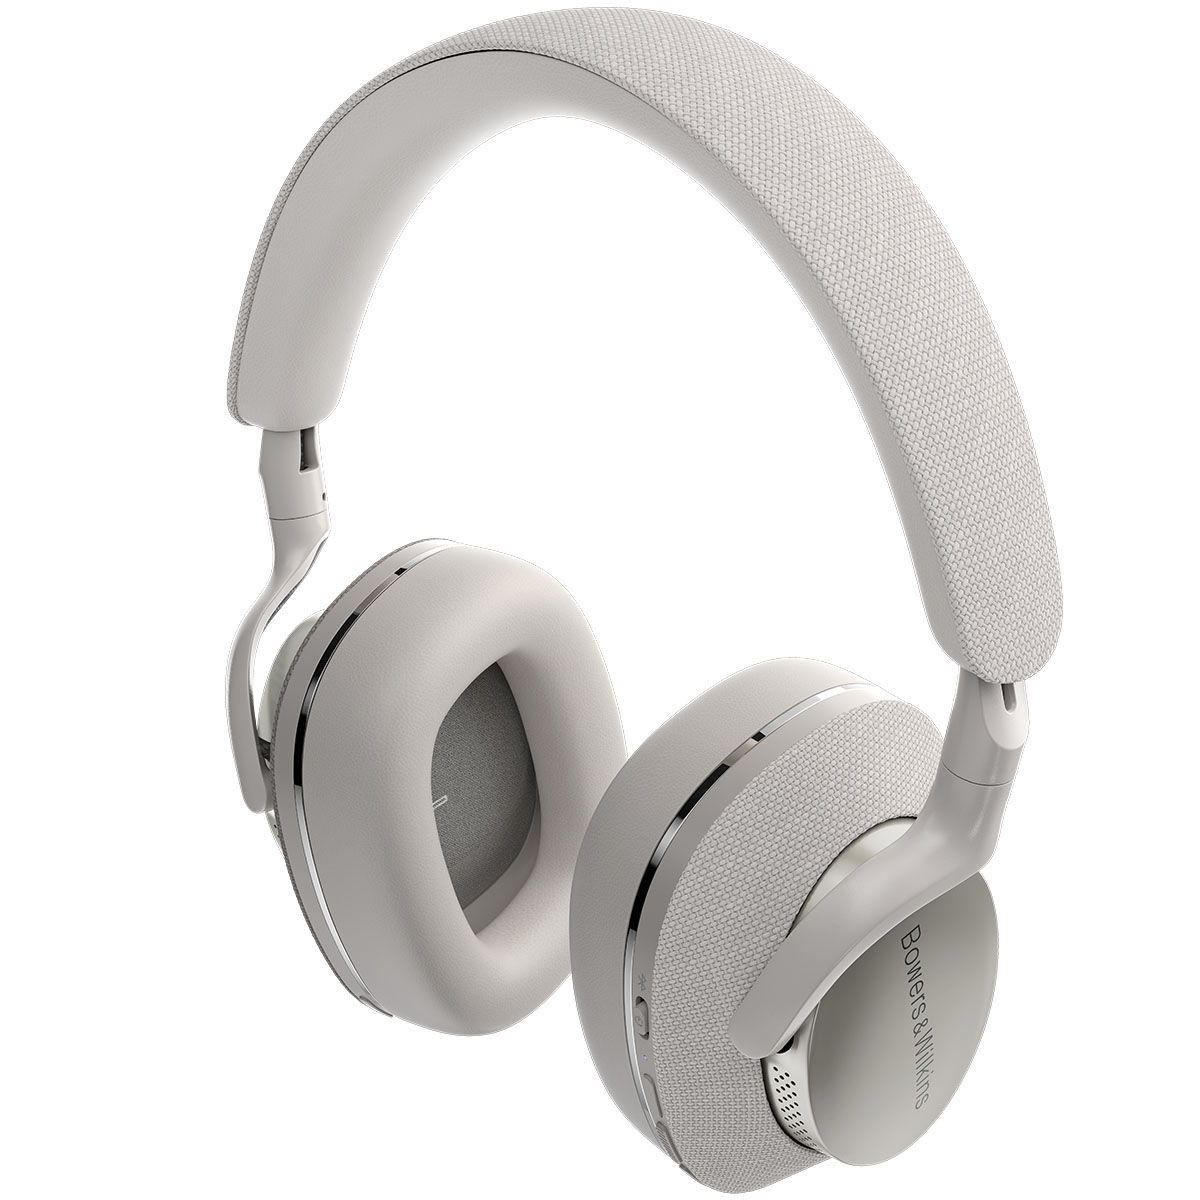 Close-up angle of the Px7 S2 Premium Wireless Over-Ear Headphones in Light Gray.